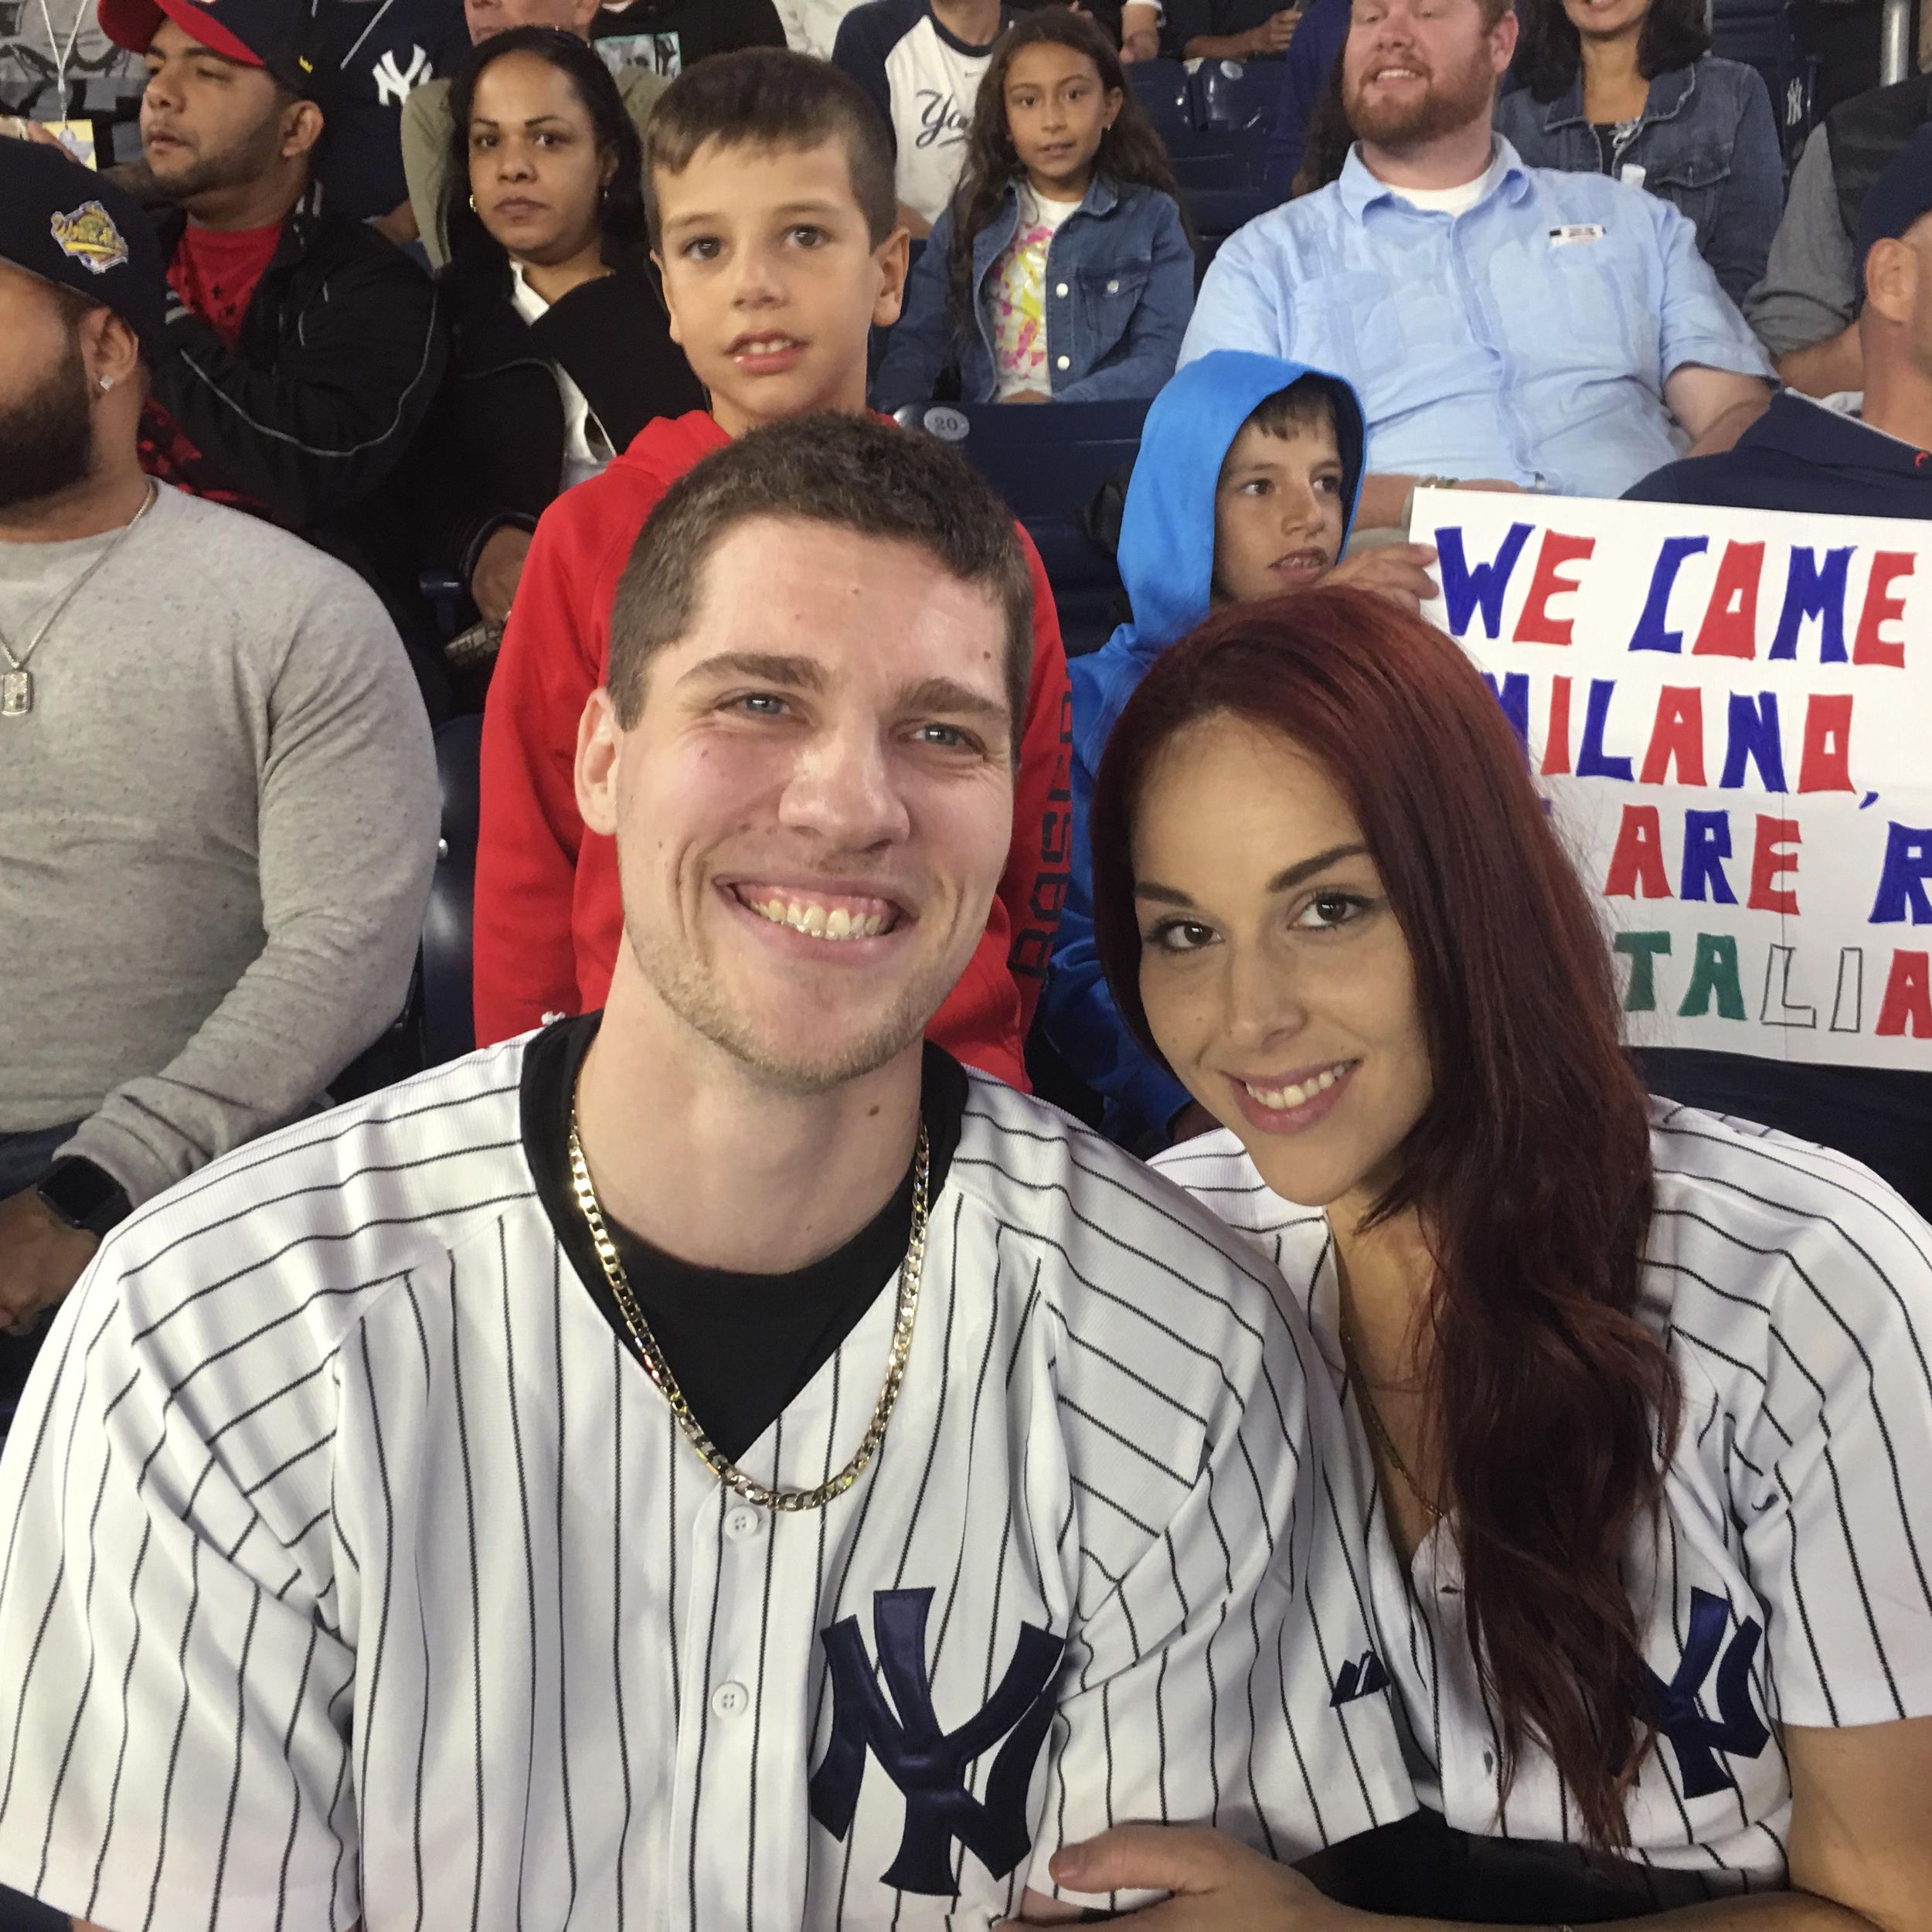 Fan drops ring during televised Yankee Stadium engagement